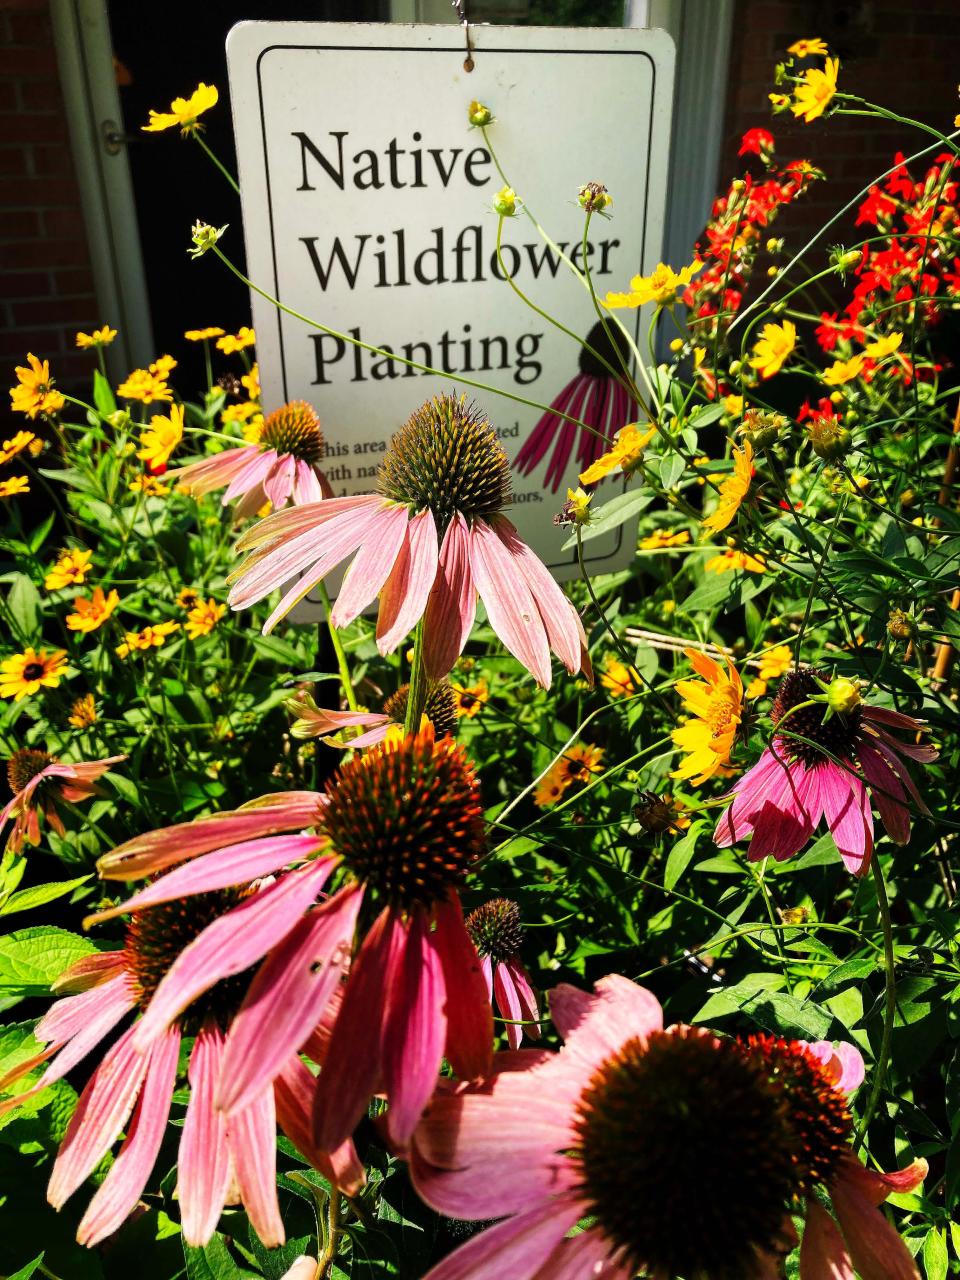 The amended Evansville weed ordinance now allows for managed native landscape and recommends that gardeners post signage that explains to passersby the highly important purpose of native plants.